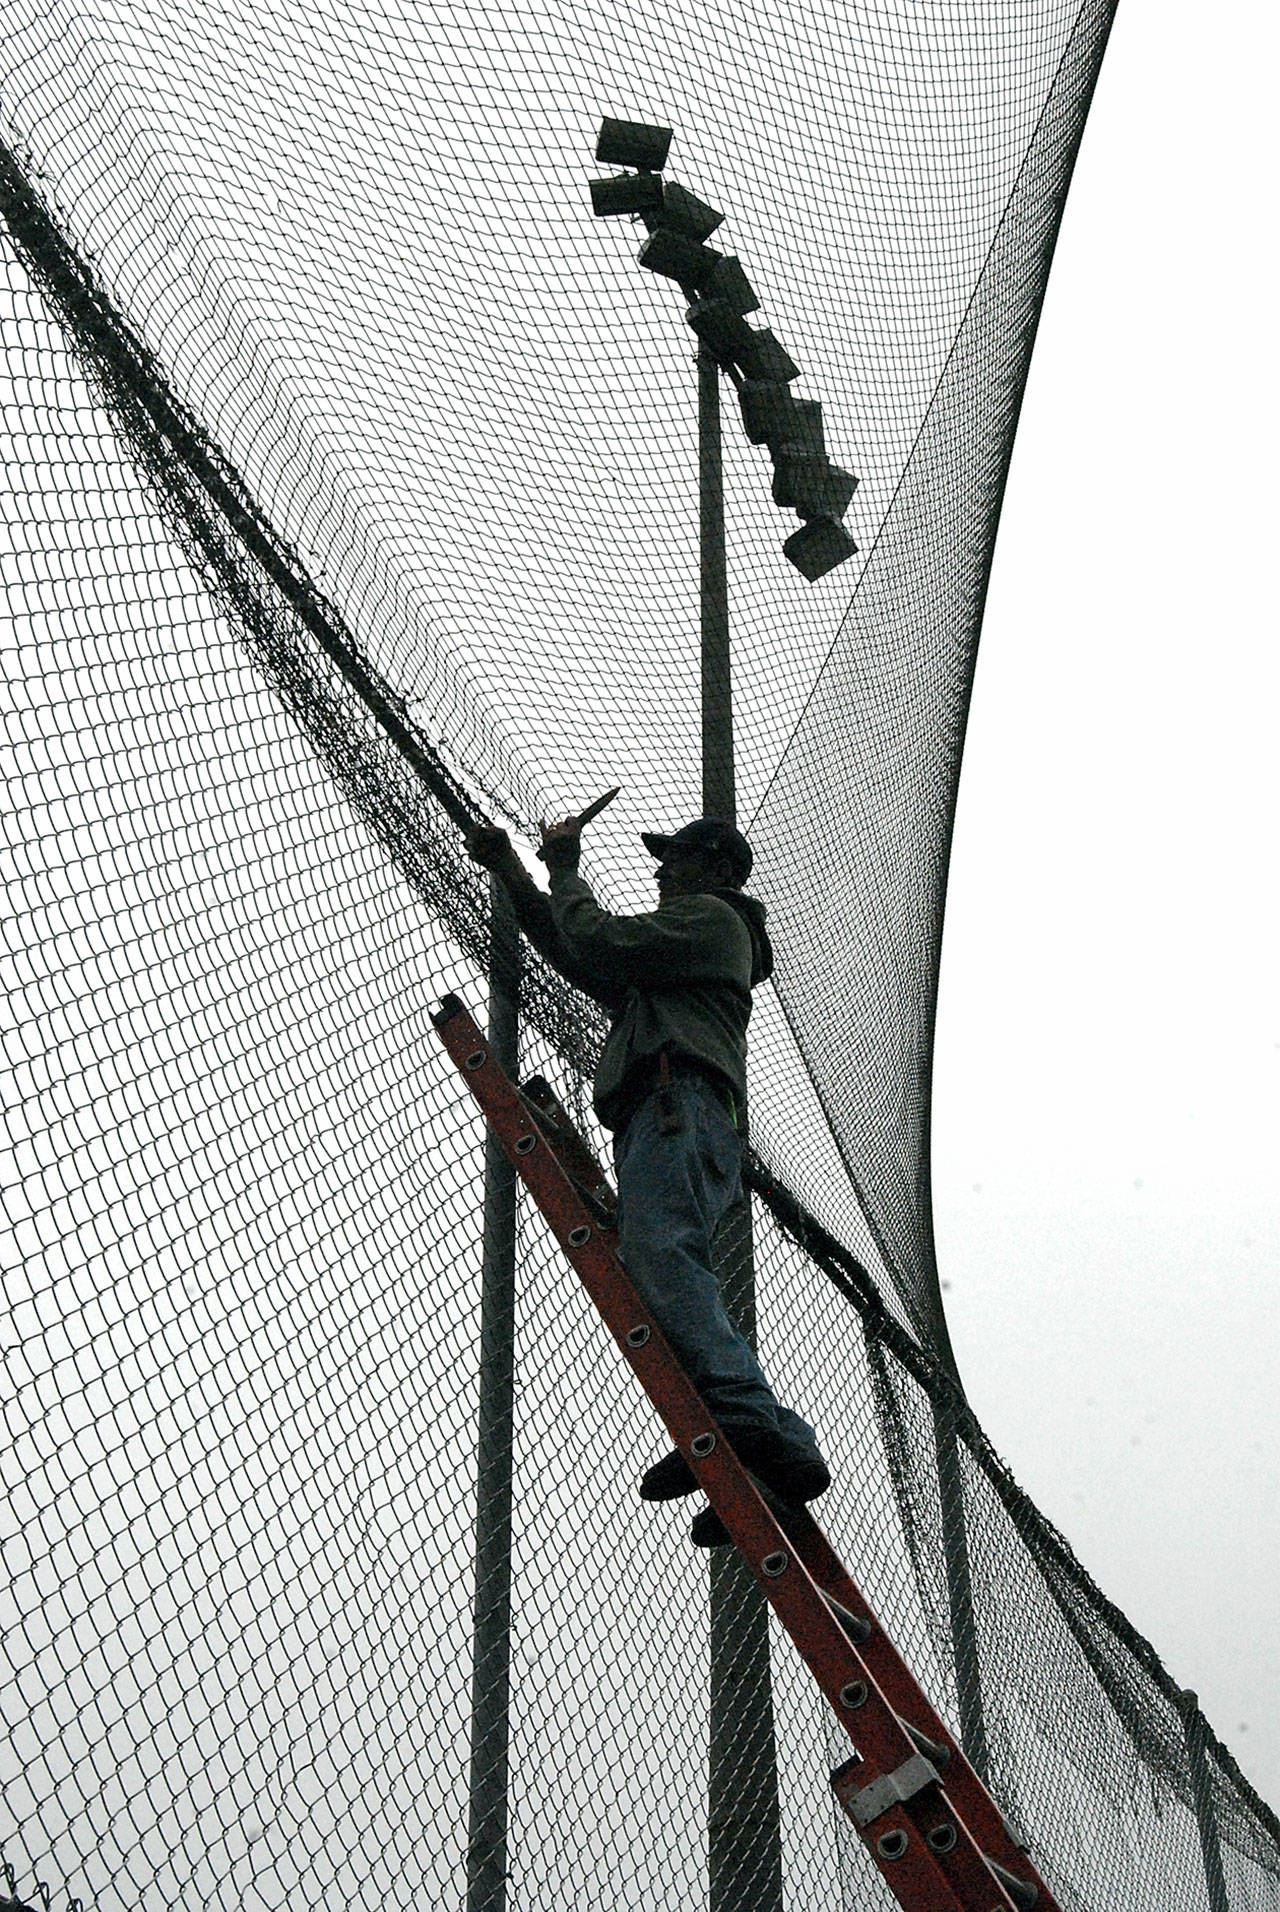 Mike McFadden mends torn netting above the on-deck circle at Port Angeles Civic Field on Wednesday. (Keith Thorpe/Peninsula Daily News)